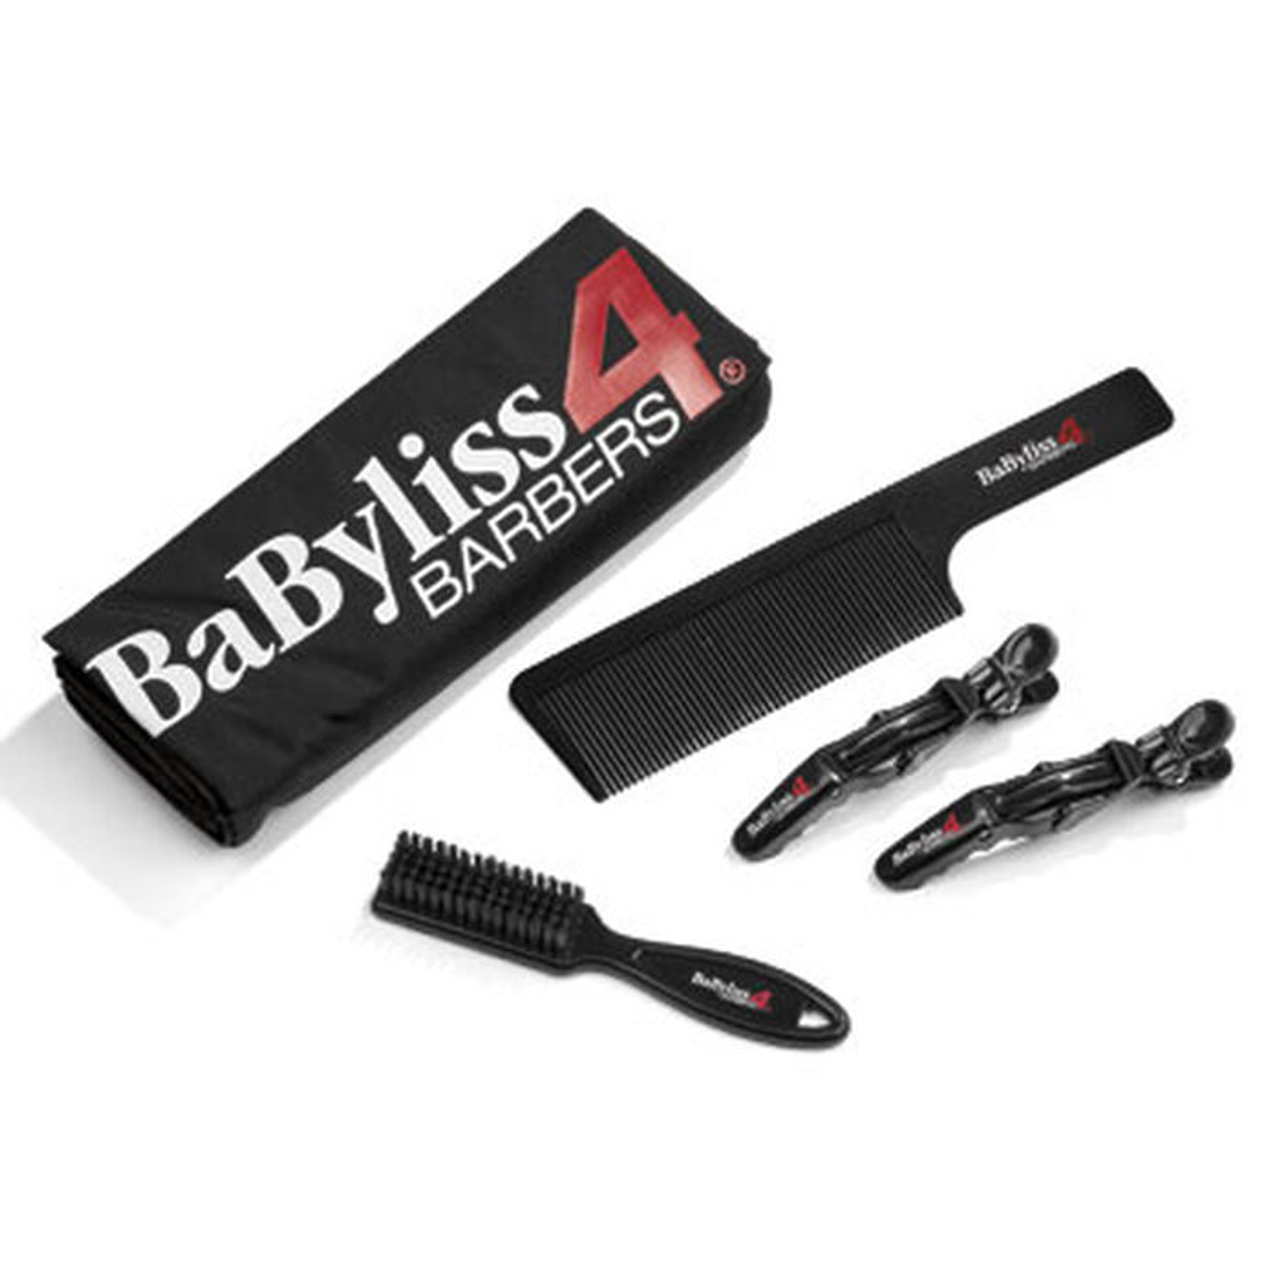 6 Pieces Barber Blade Cleaning Brush Clipper Cleaning Nylon Brush Clipper Cleaner Brush Cleaning Clipper Styling Brush Tool for Men( Red/Black)